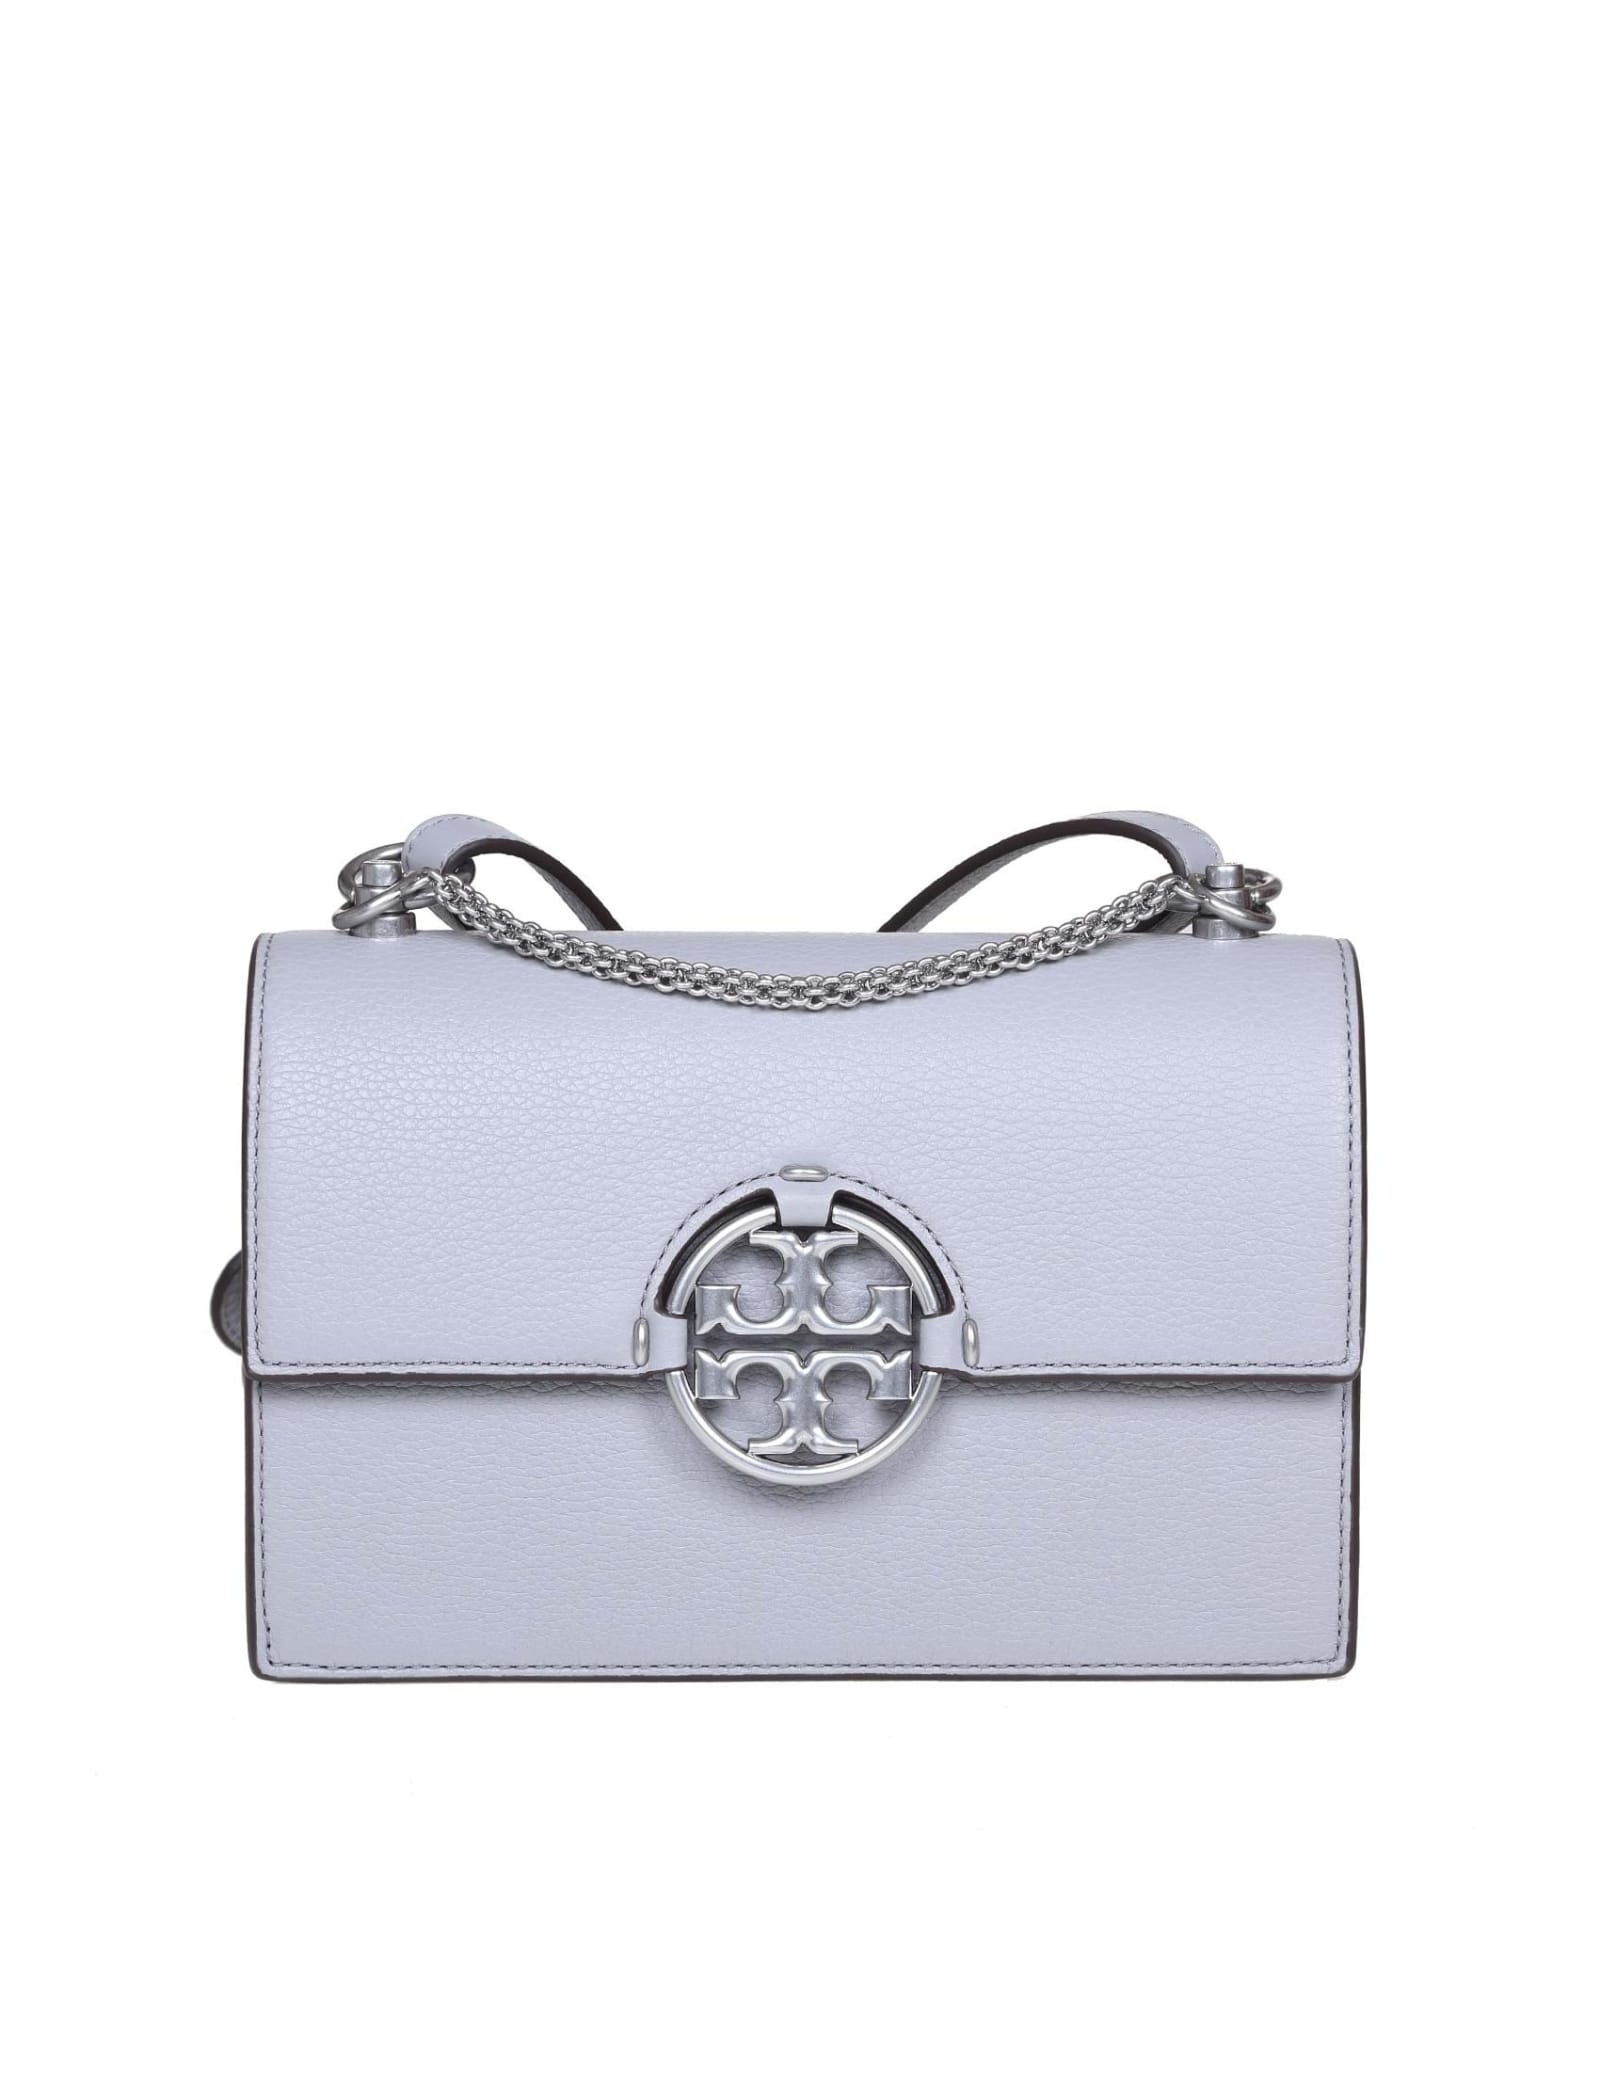 Tory Burch Miller Small In Gray Leather